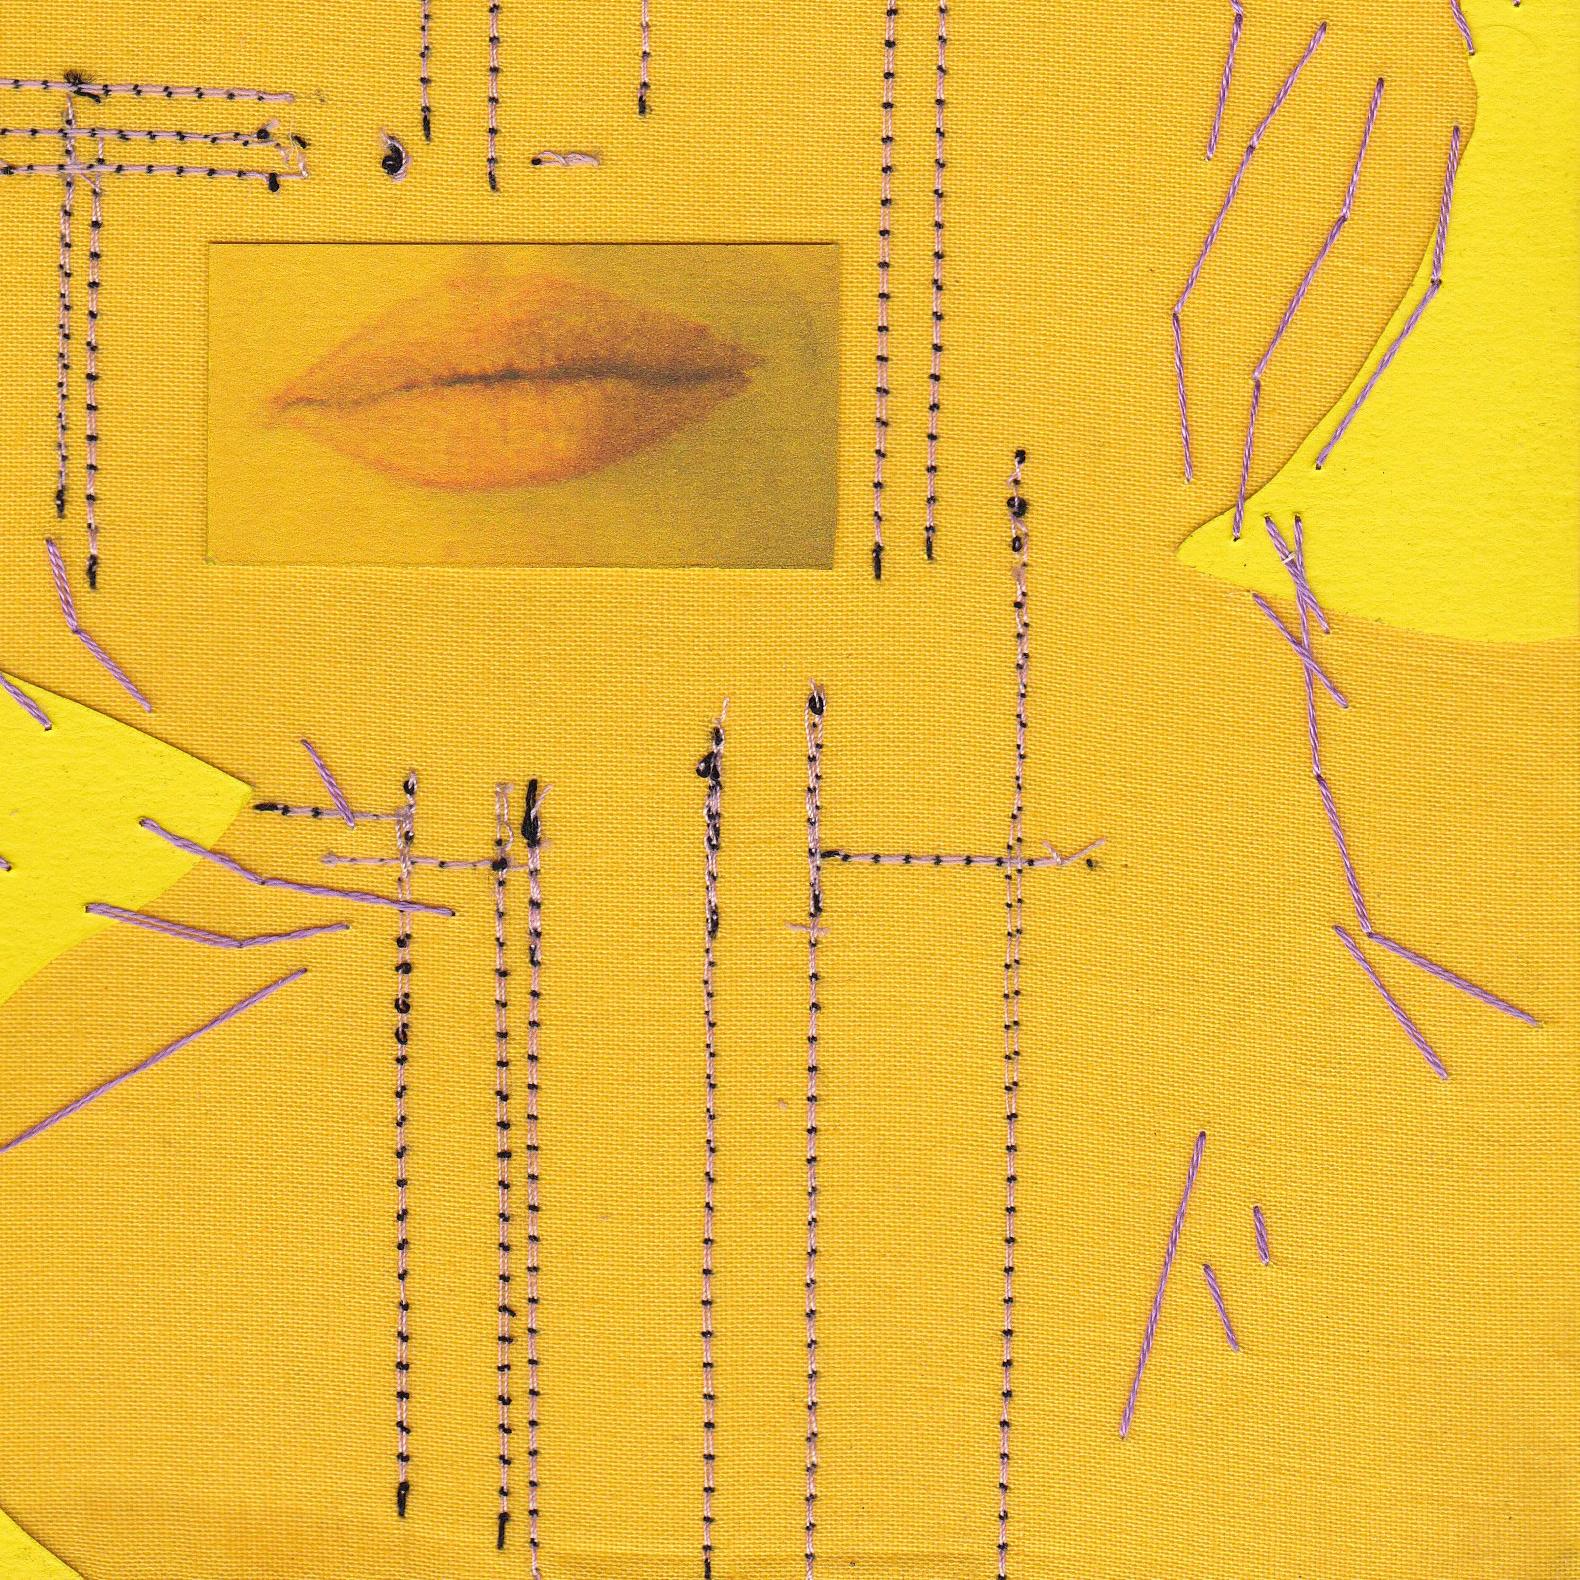 From the artist's Brigitte Bardot series

Hand and Machine sewn thread on paper